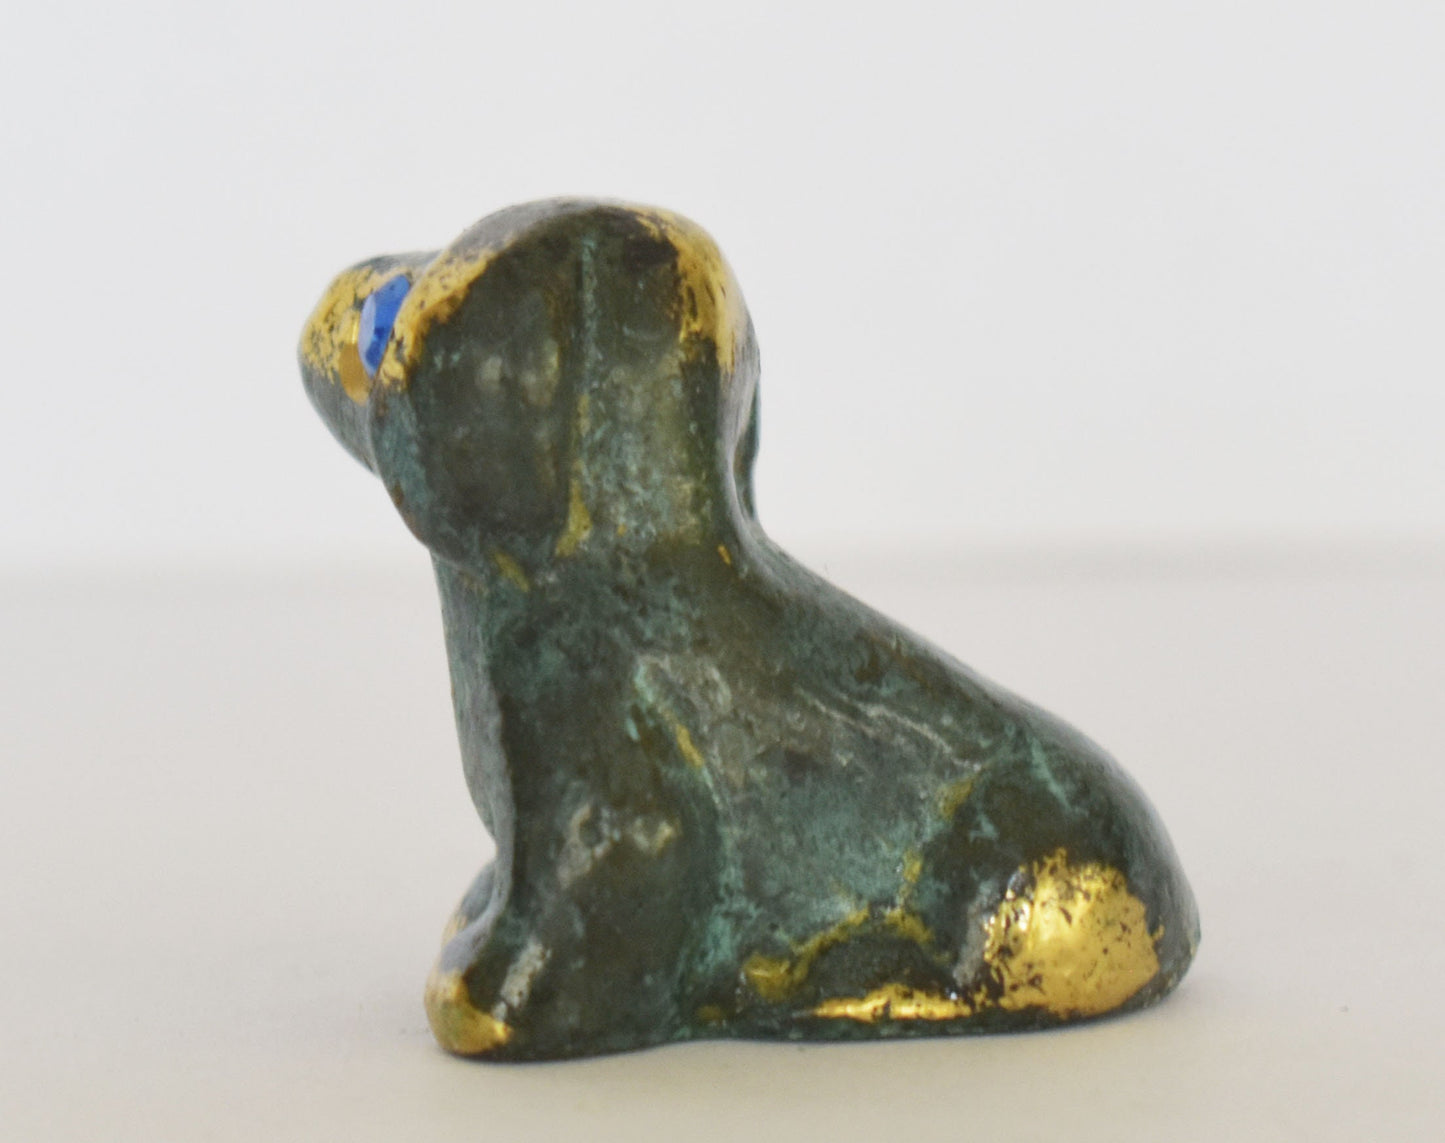 Dog - Man's Best Friend - Symbol of Loyal, Faithful, Honesty and Willing to Fight Injustice - Miniature - pure bronze  statue